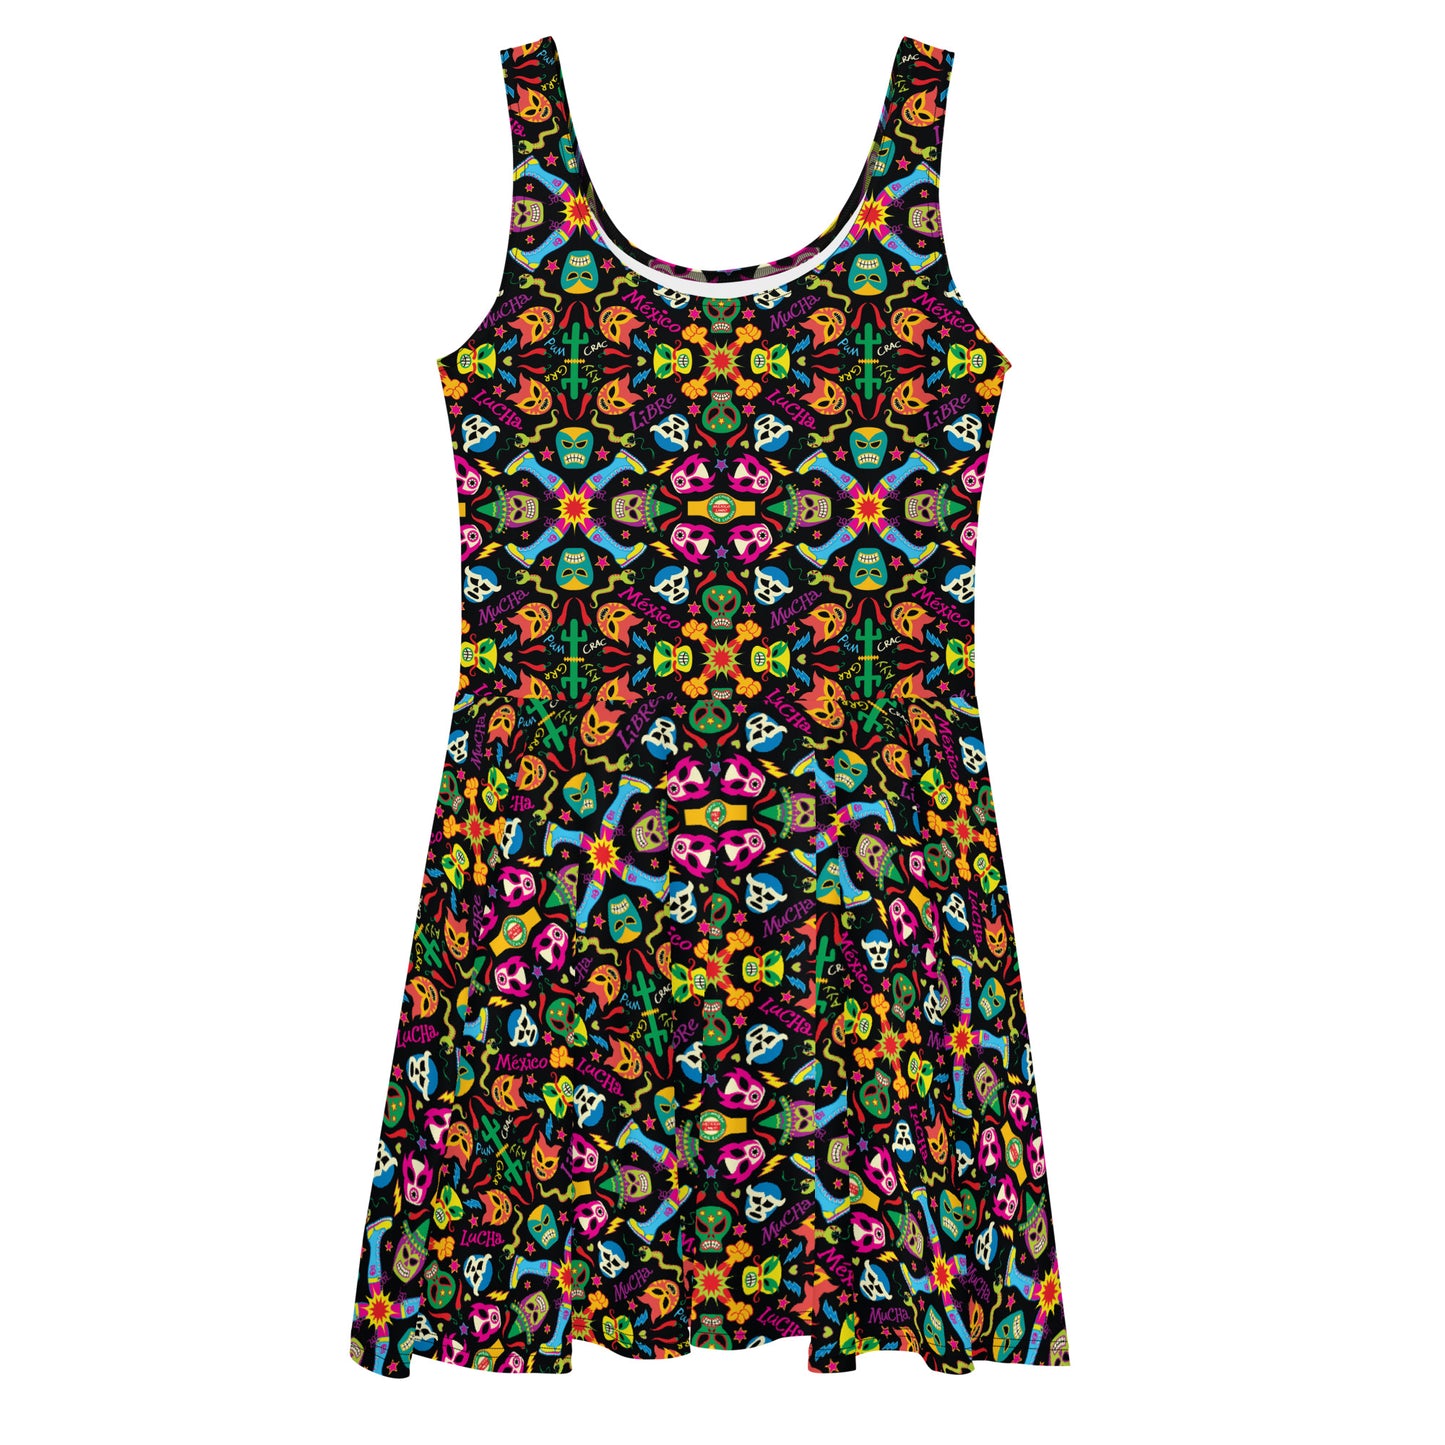 Mexican wrestling colorful party Skater Dress. Front view